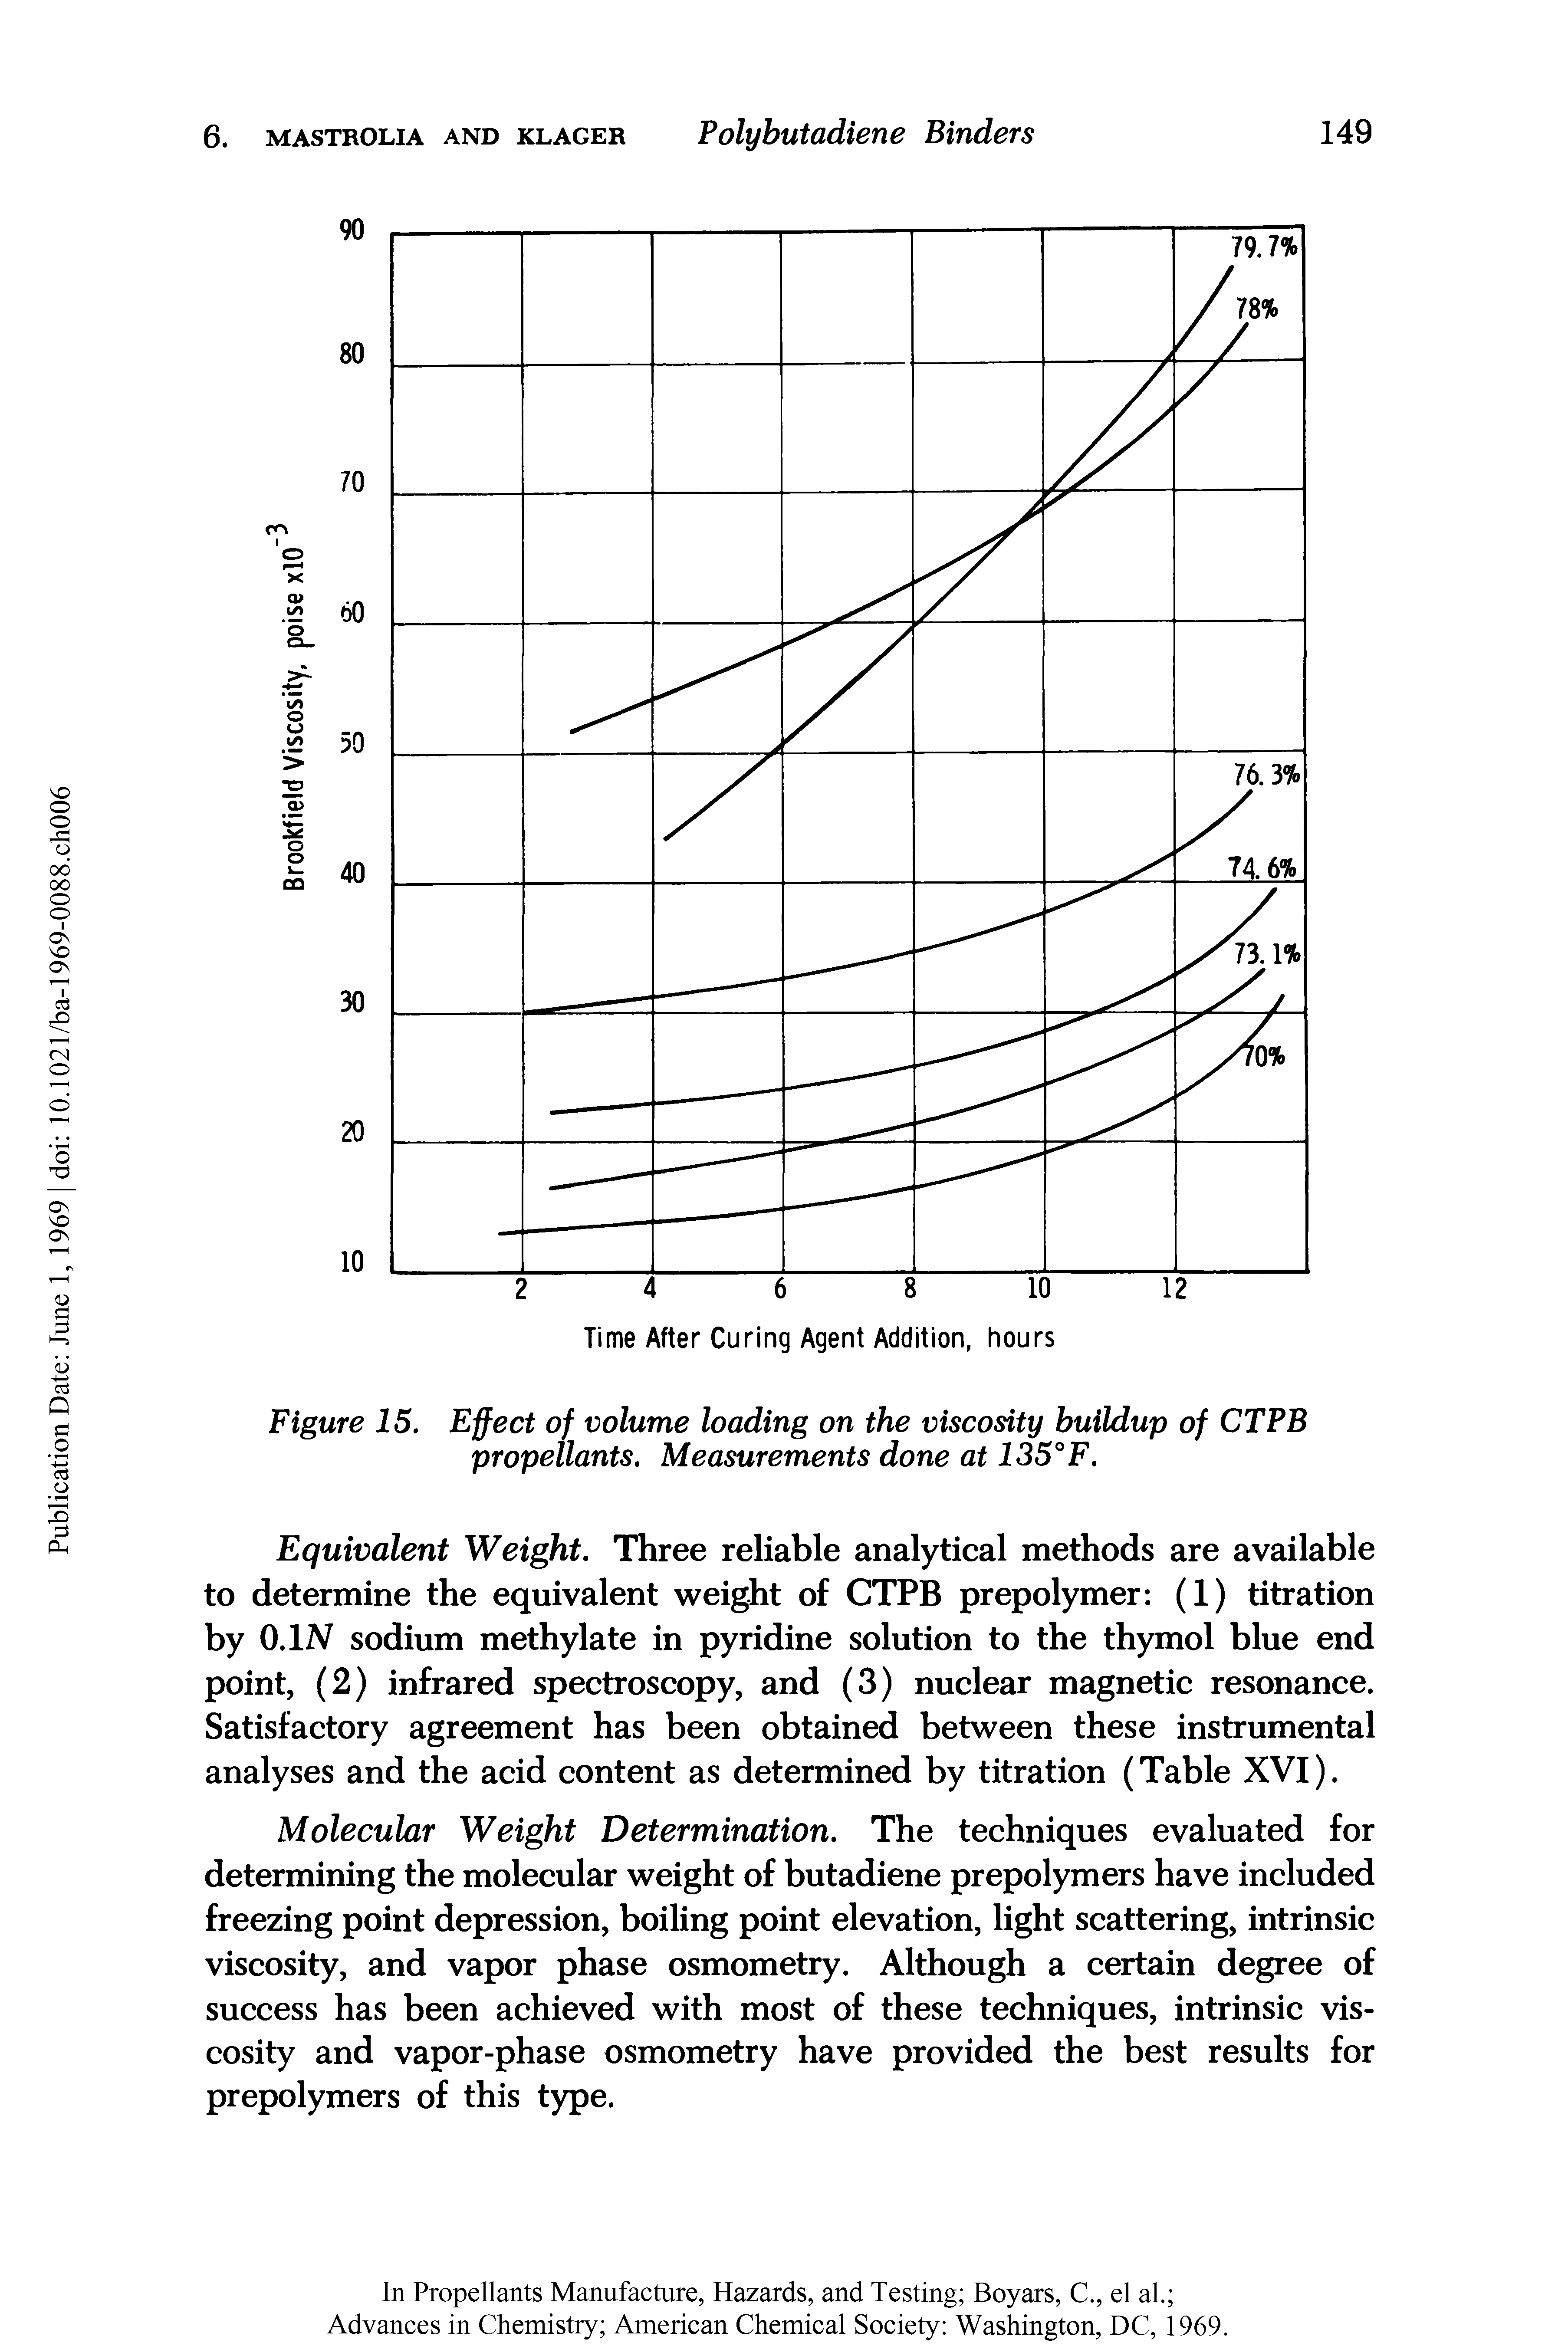 Figure 15. Effect of volume loading on the viscosity buildup of CTPB propellants. Measurements done at 135°F.